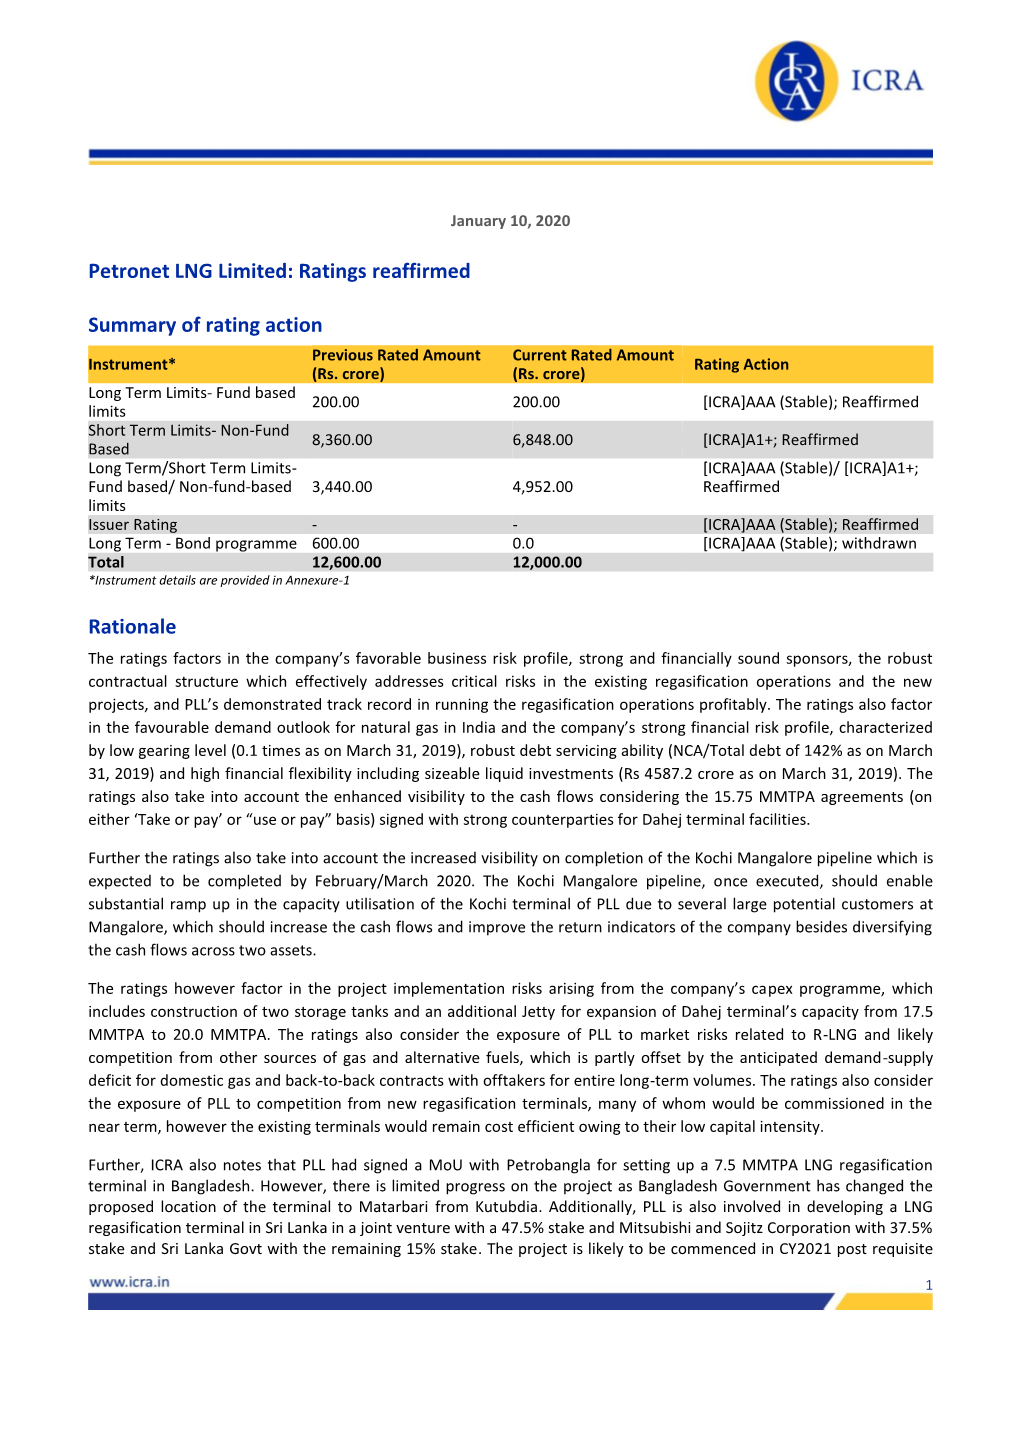 Petronet LNG Limited: Ratings Reaffirmed